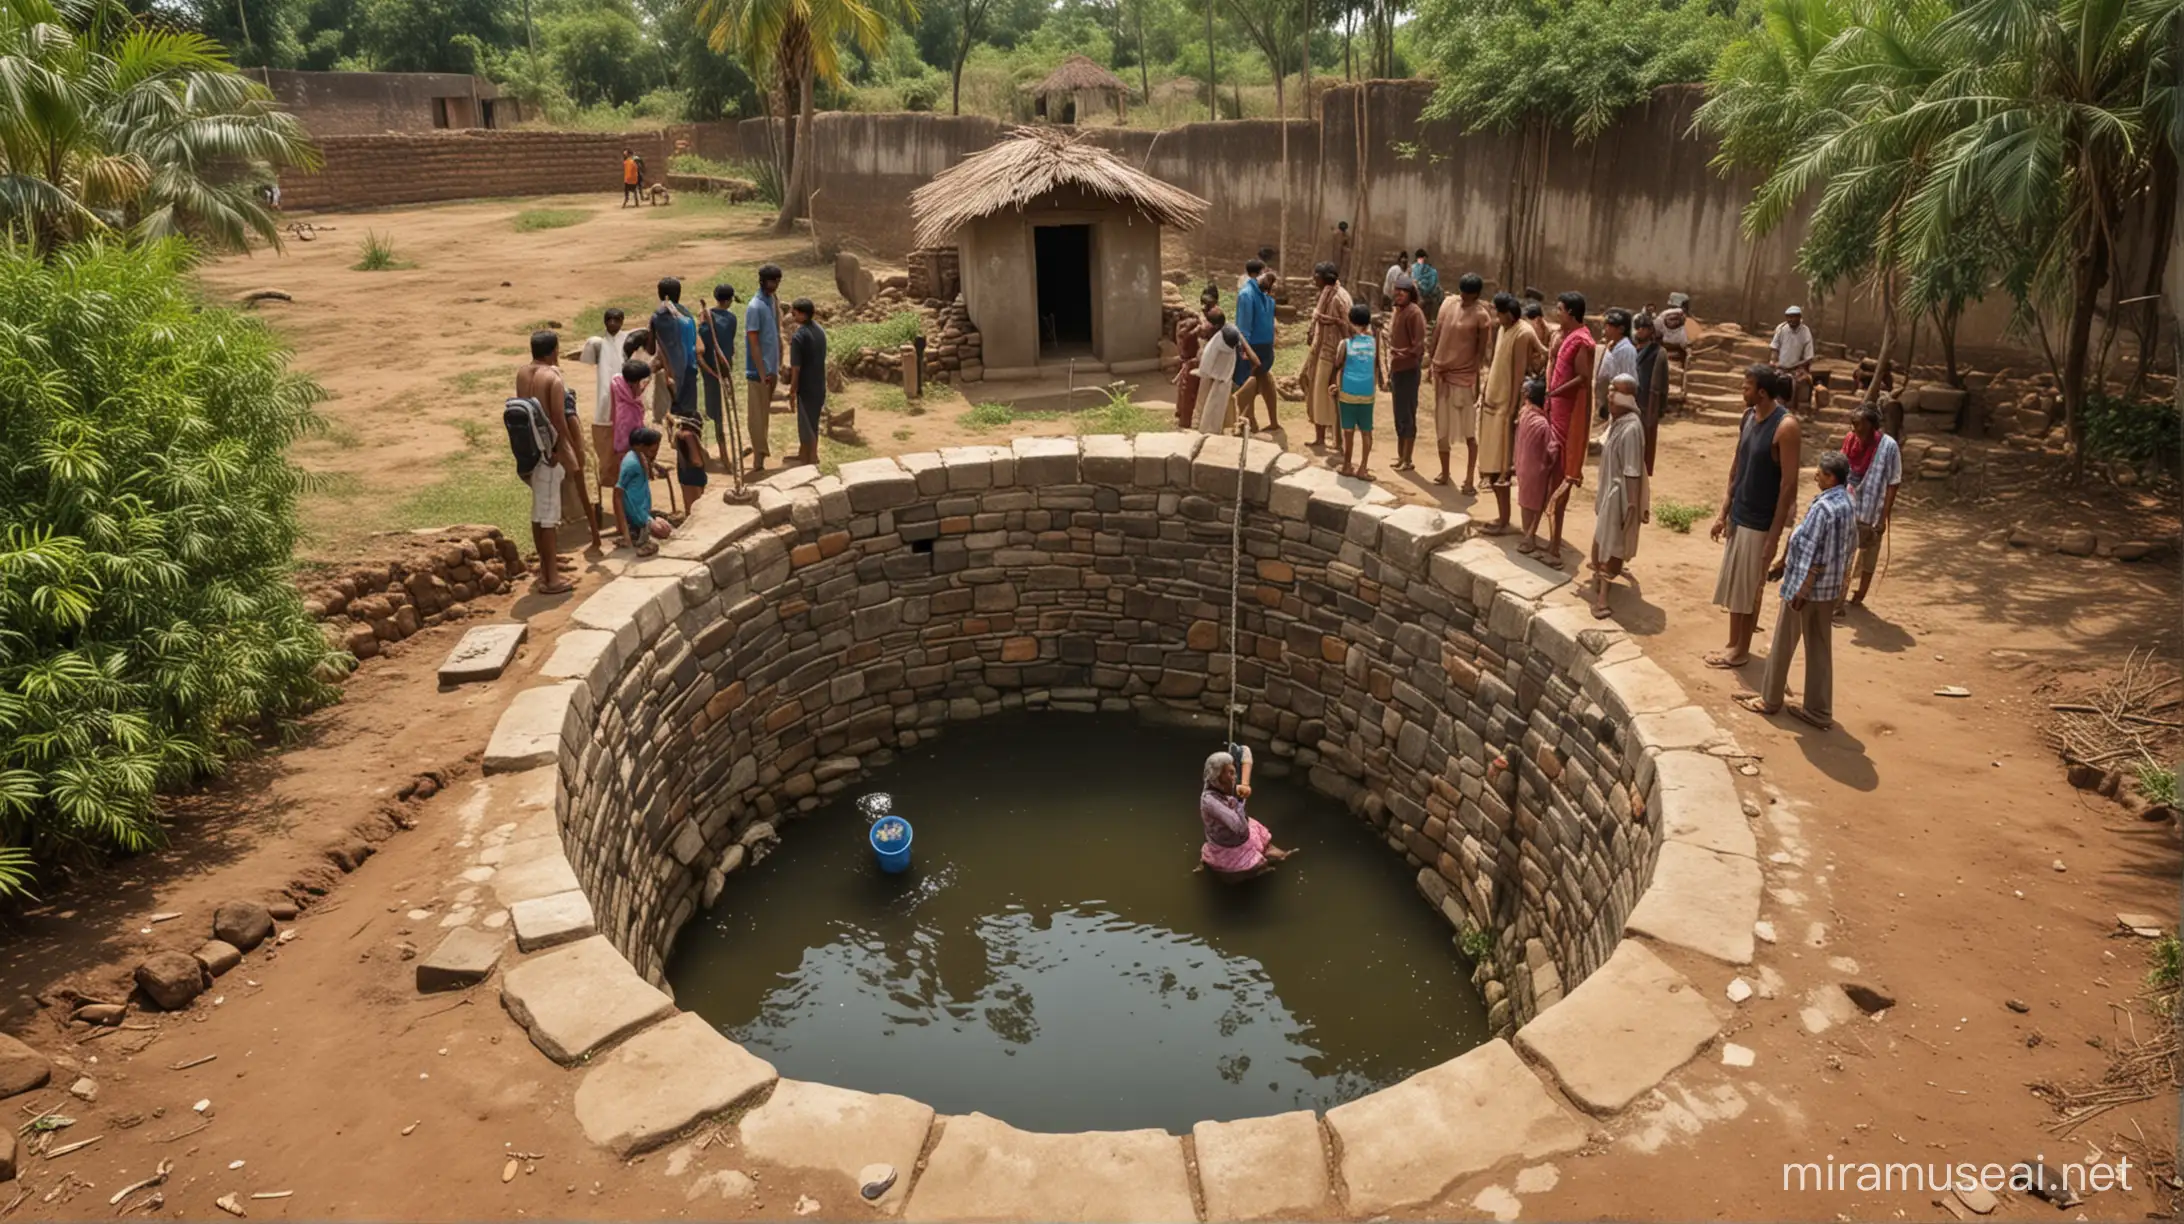 Well near the house in the village of india and some panic indian peoples looking inside the small well, wide angle shot, hyper detailed